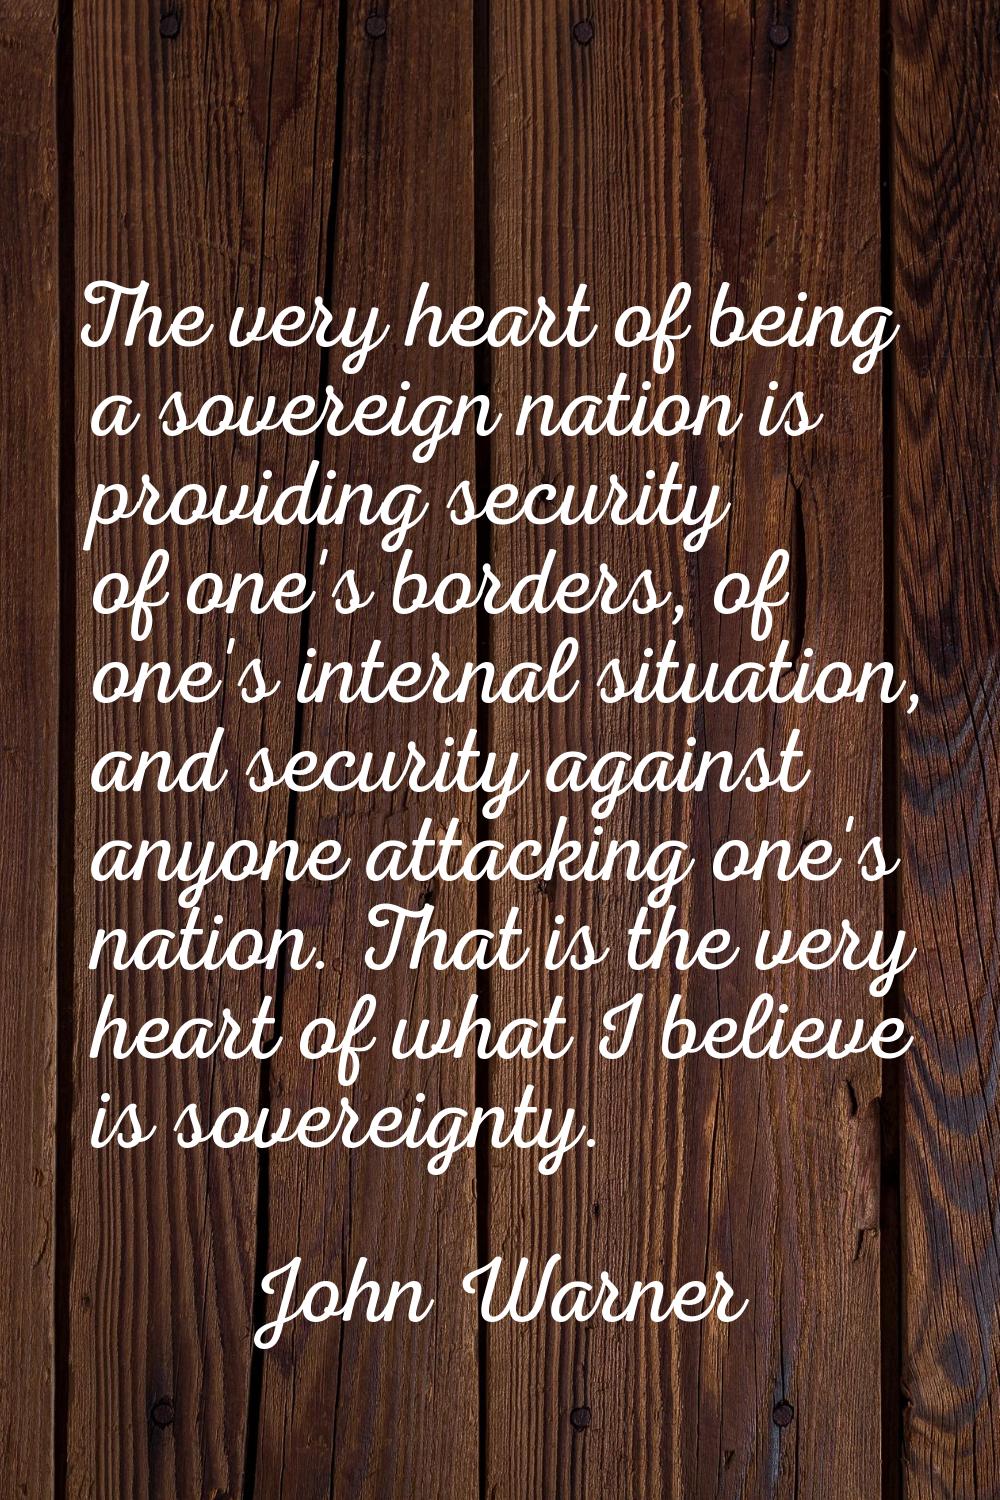 The very heart of being a sovereign nation is providing security of one's borders, of one's interna